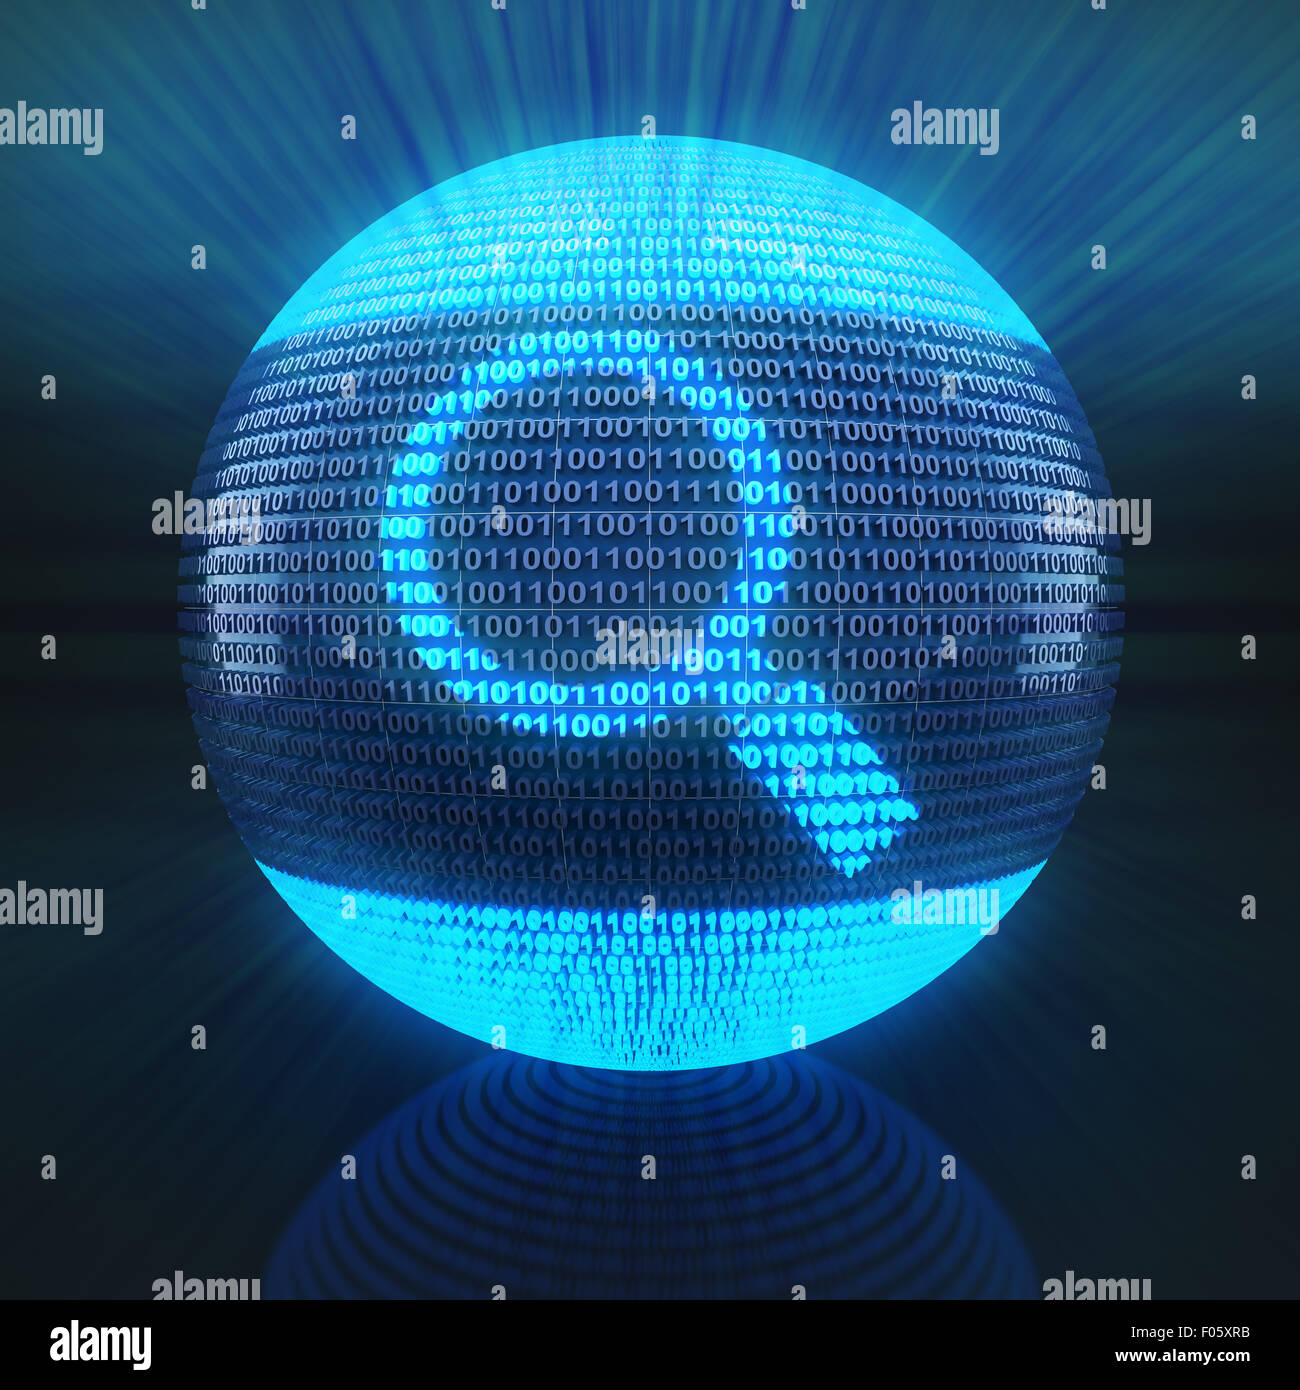 Search symbol on globe formed by binary code Stock Photo